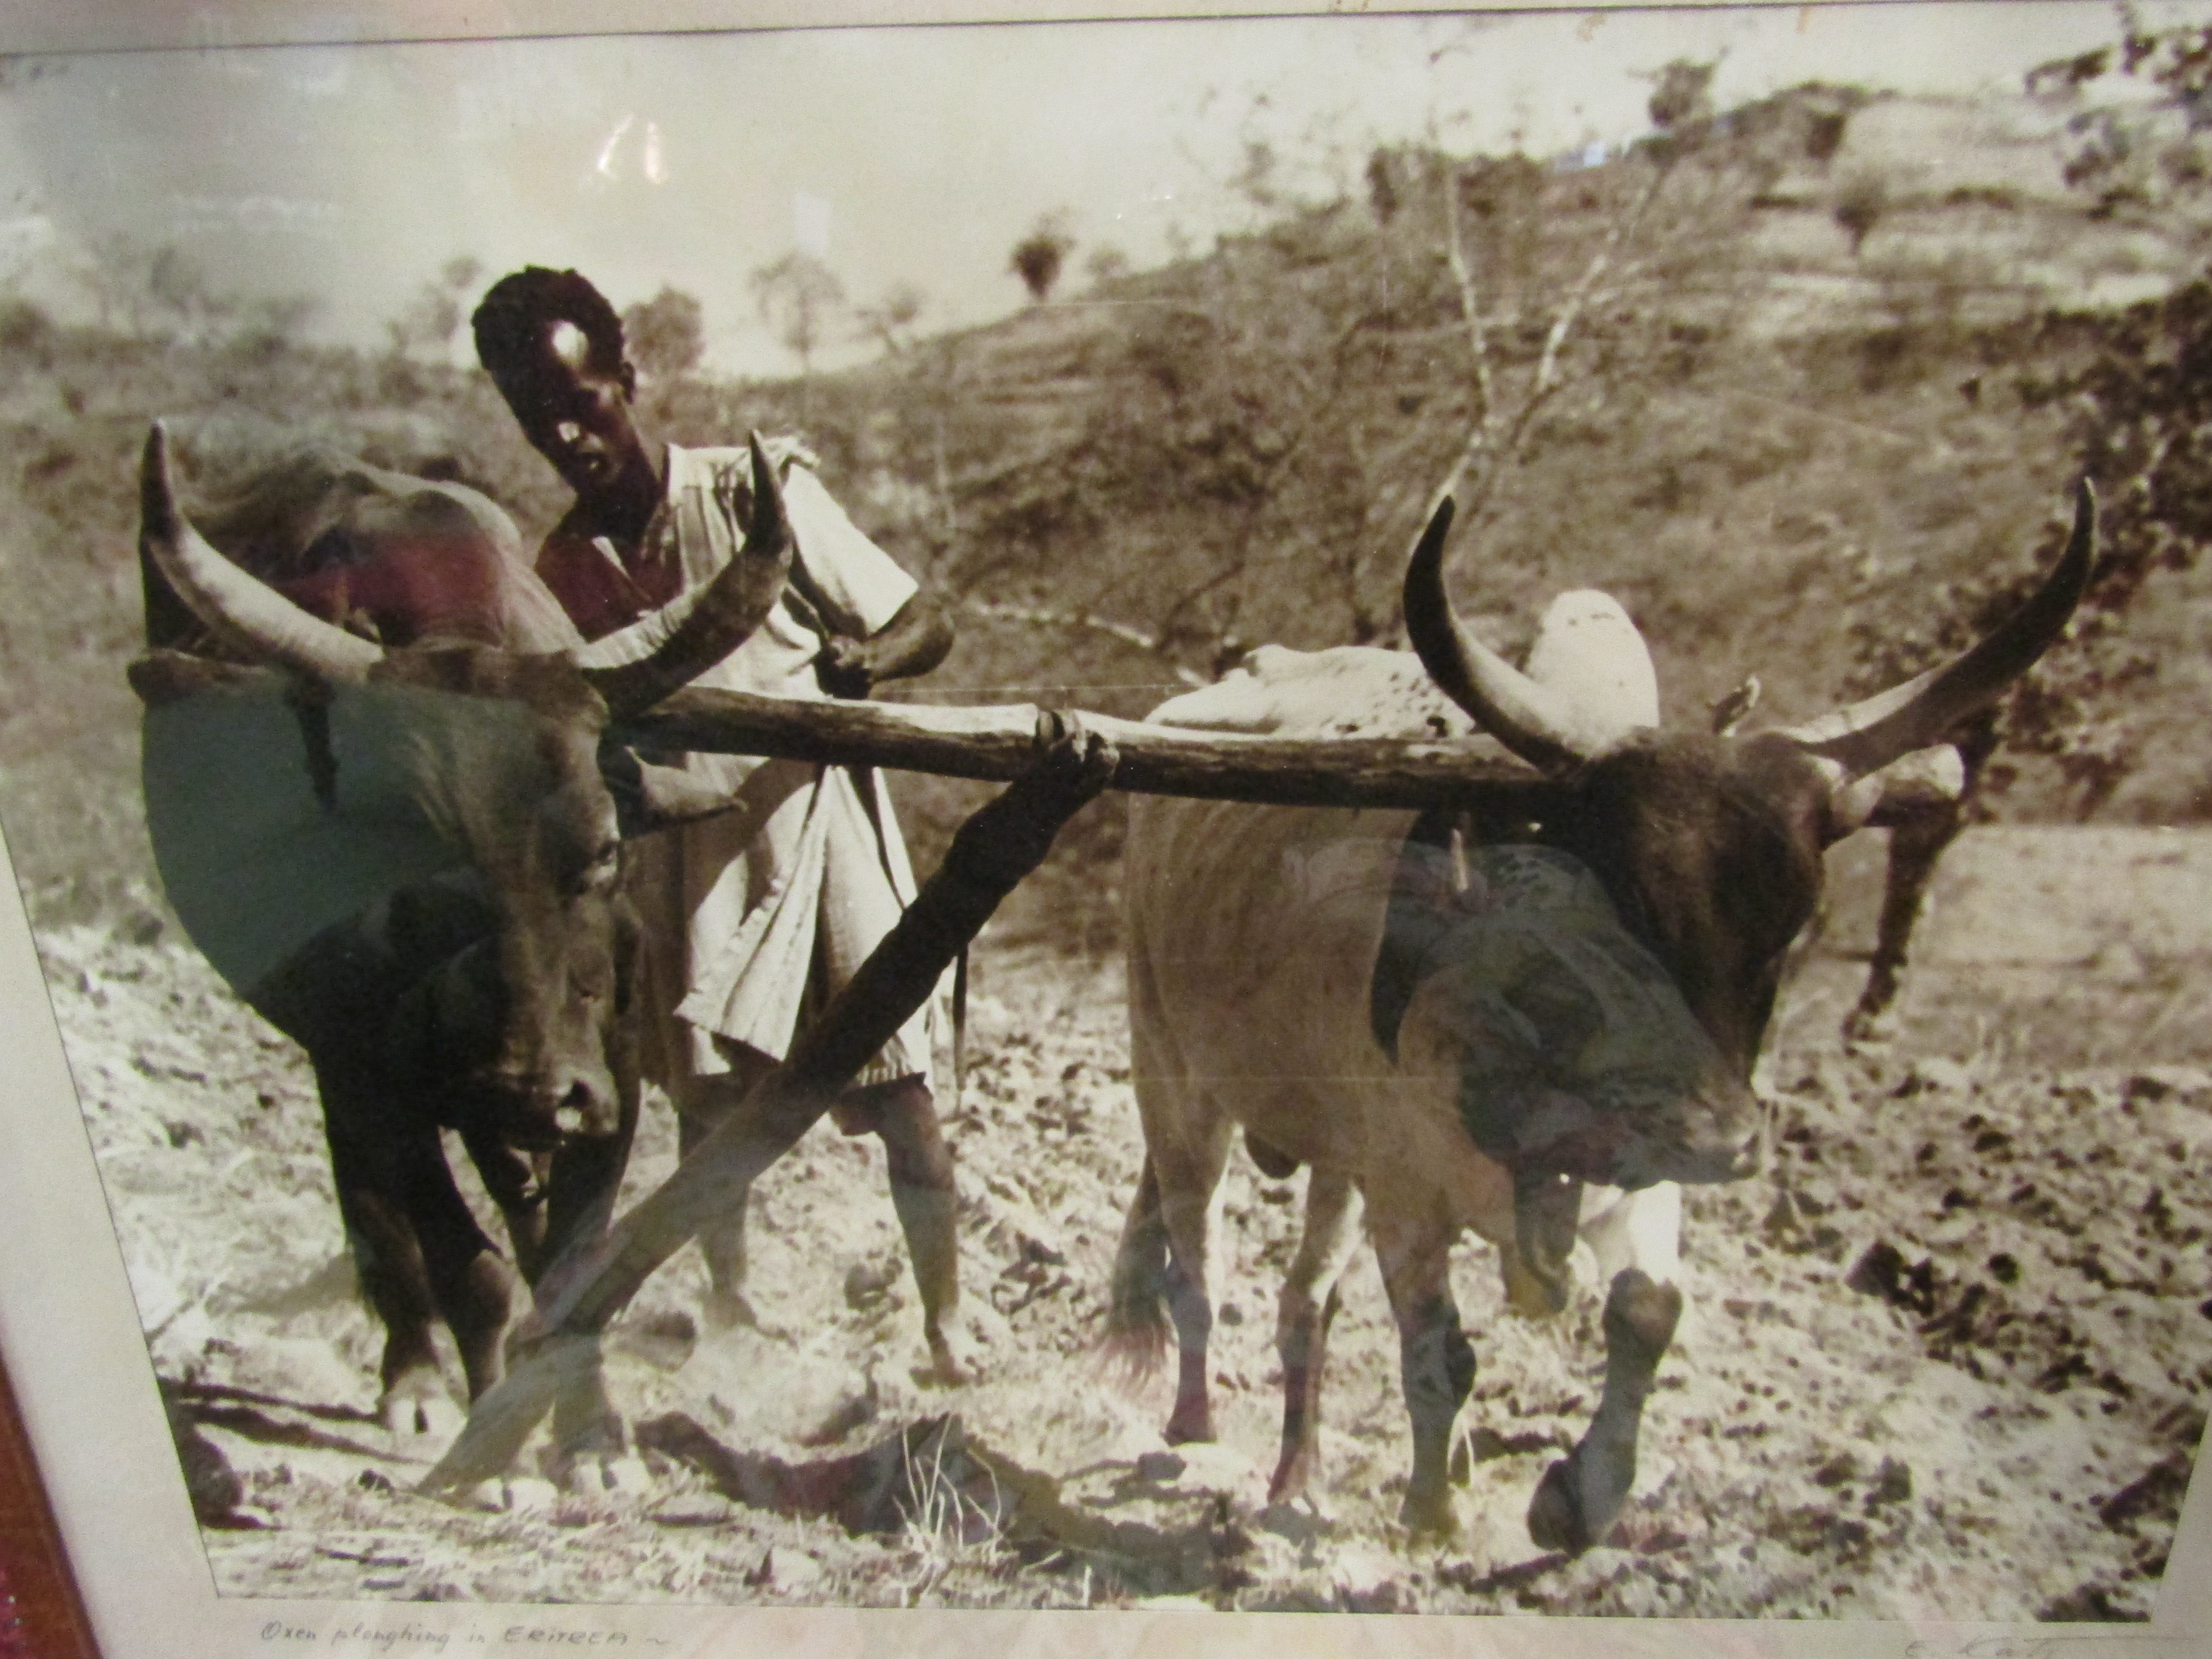 Two large photographs of rural scenes in Eritrea. Signed "E.Katy". c.1940's.